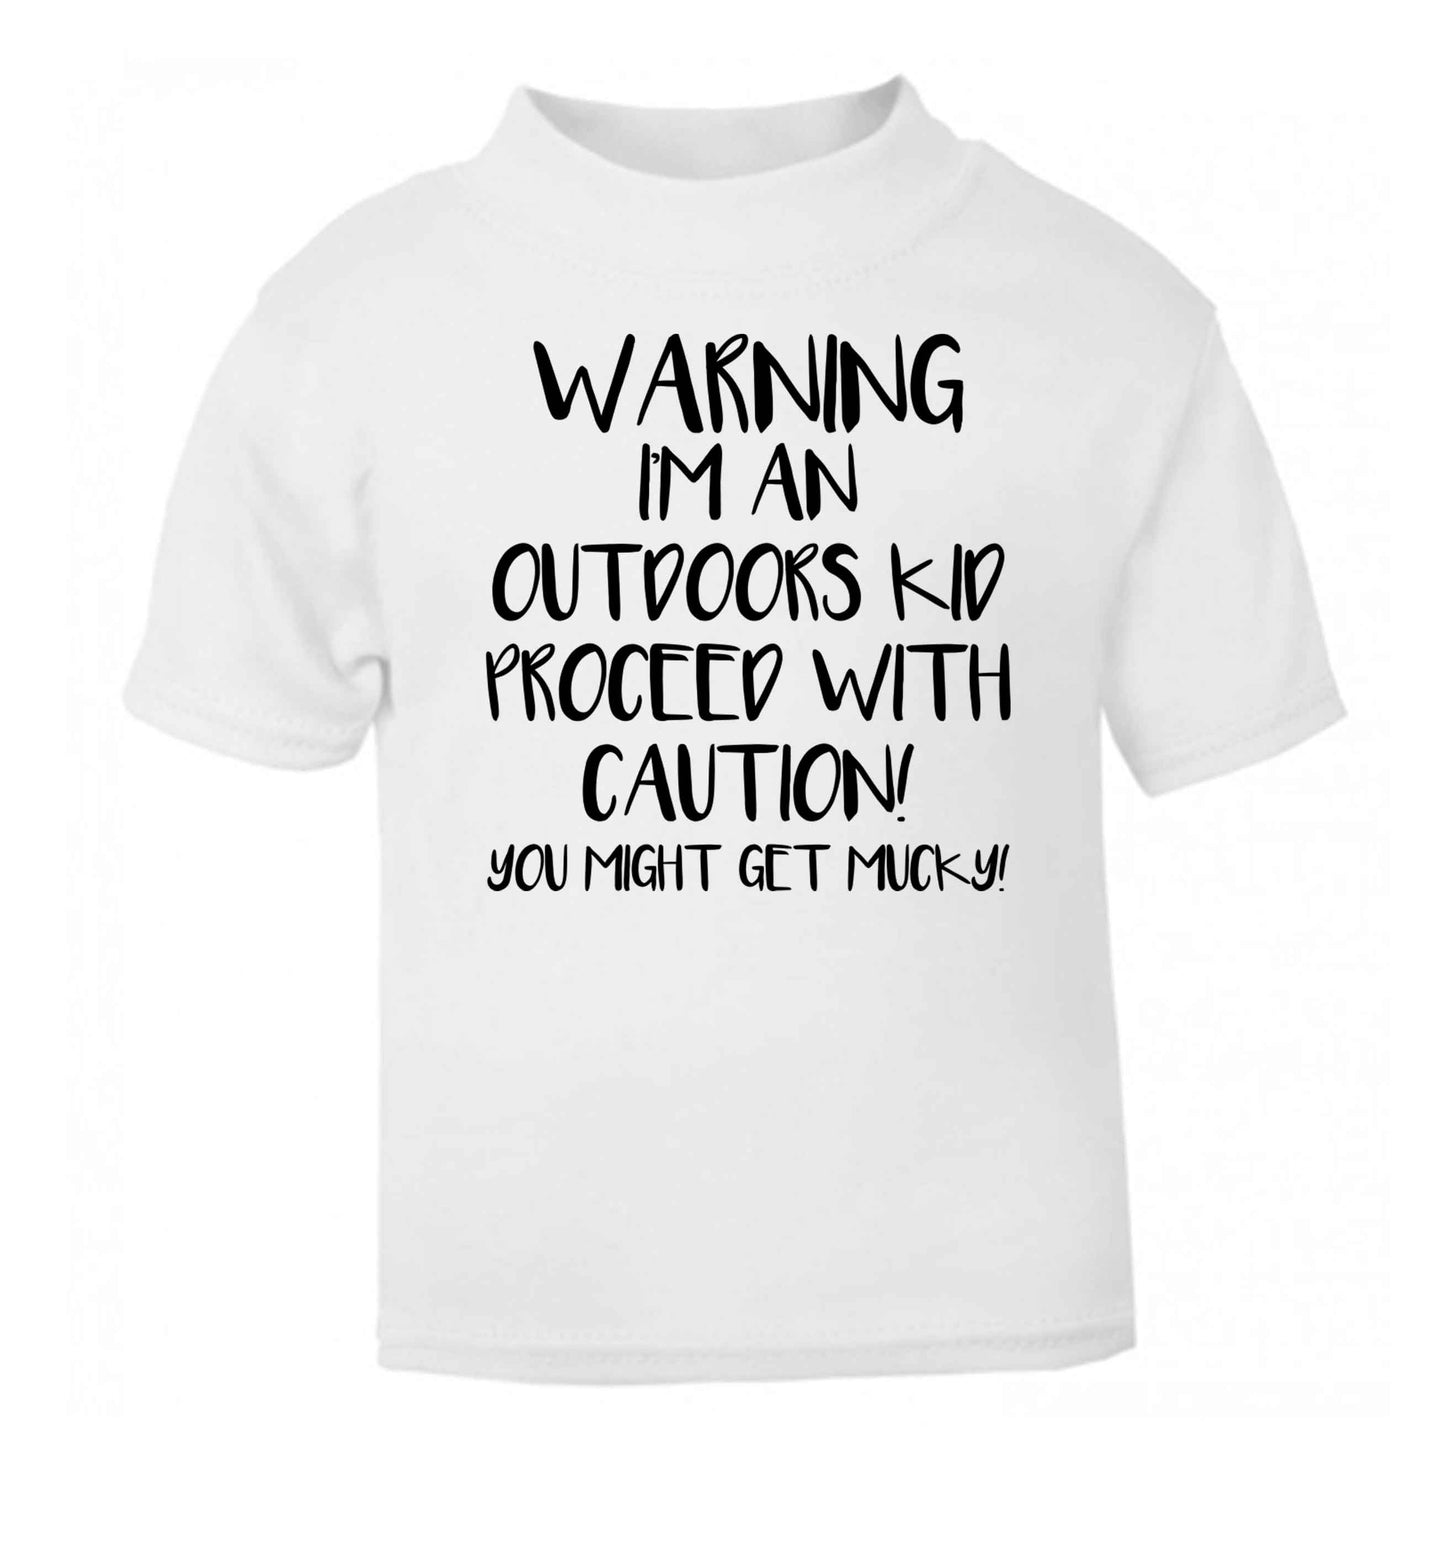 Warning I'm an outdoors kid! Proceed with caution you might get mucky white Baby Toddler Tshirt 2 Years